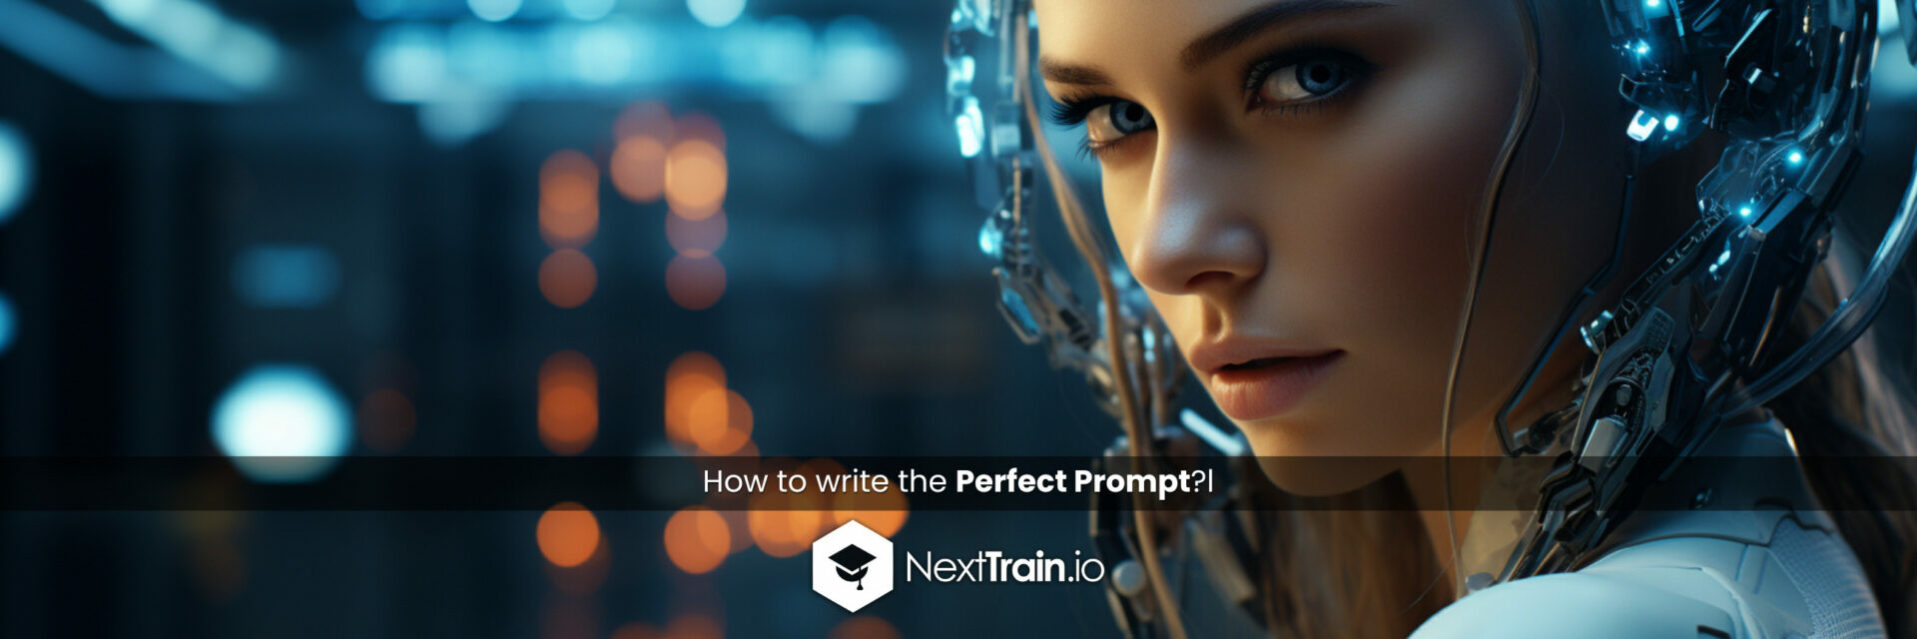 How to write the Perfect Prompt?l